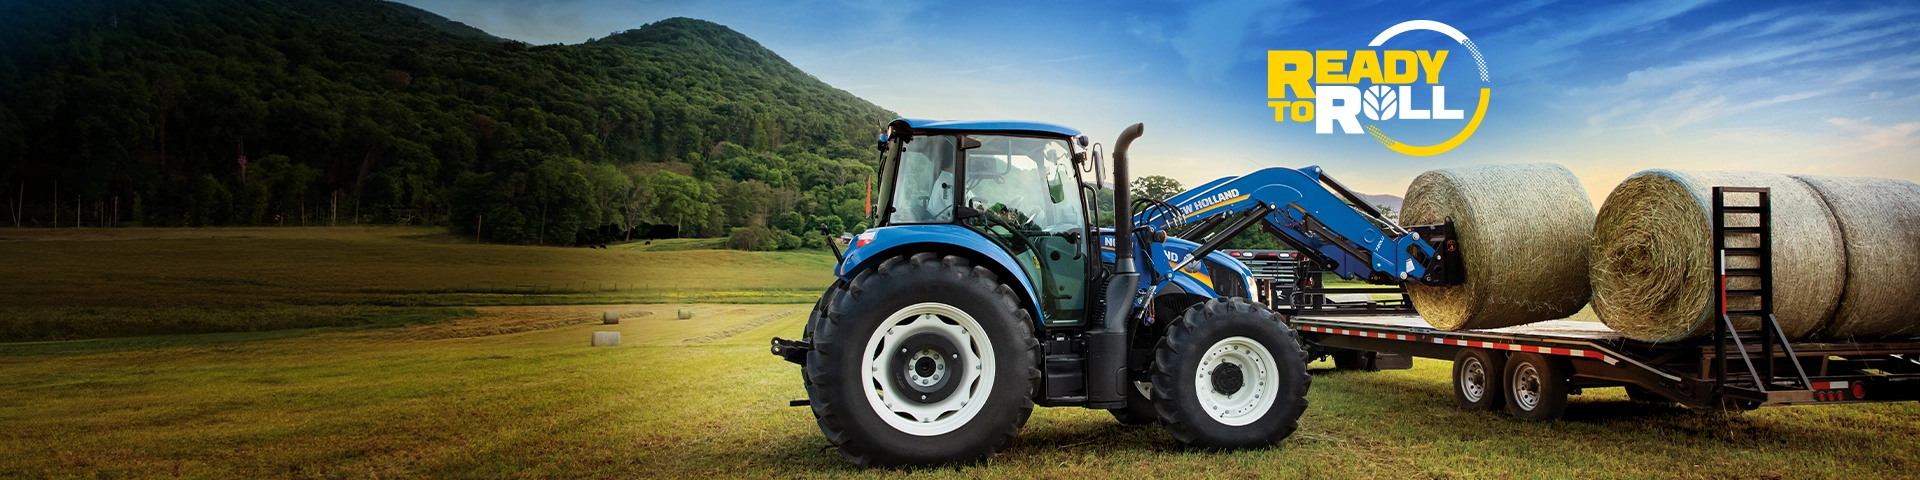 Special offers on New Holland tractors